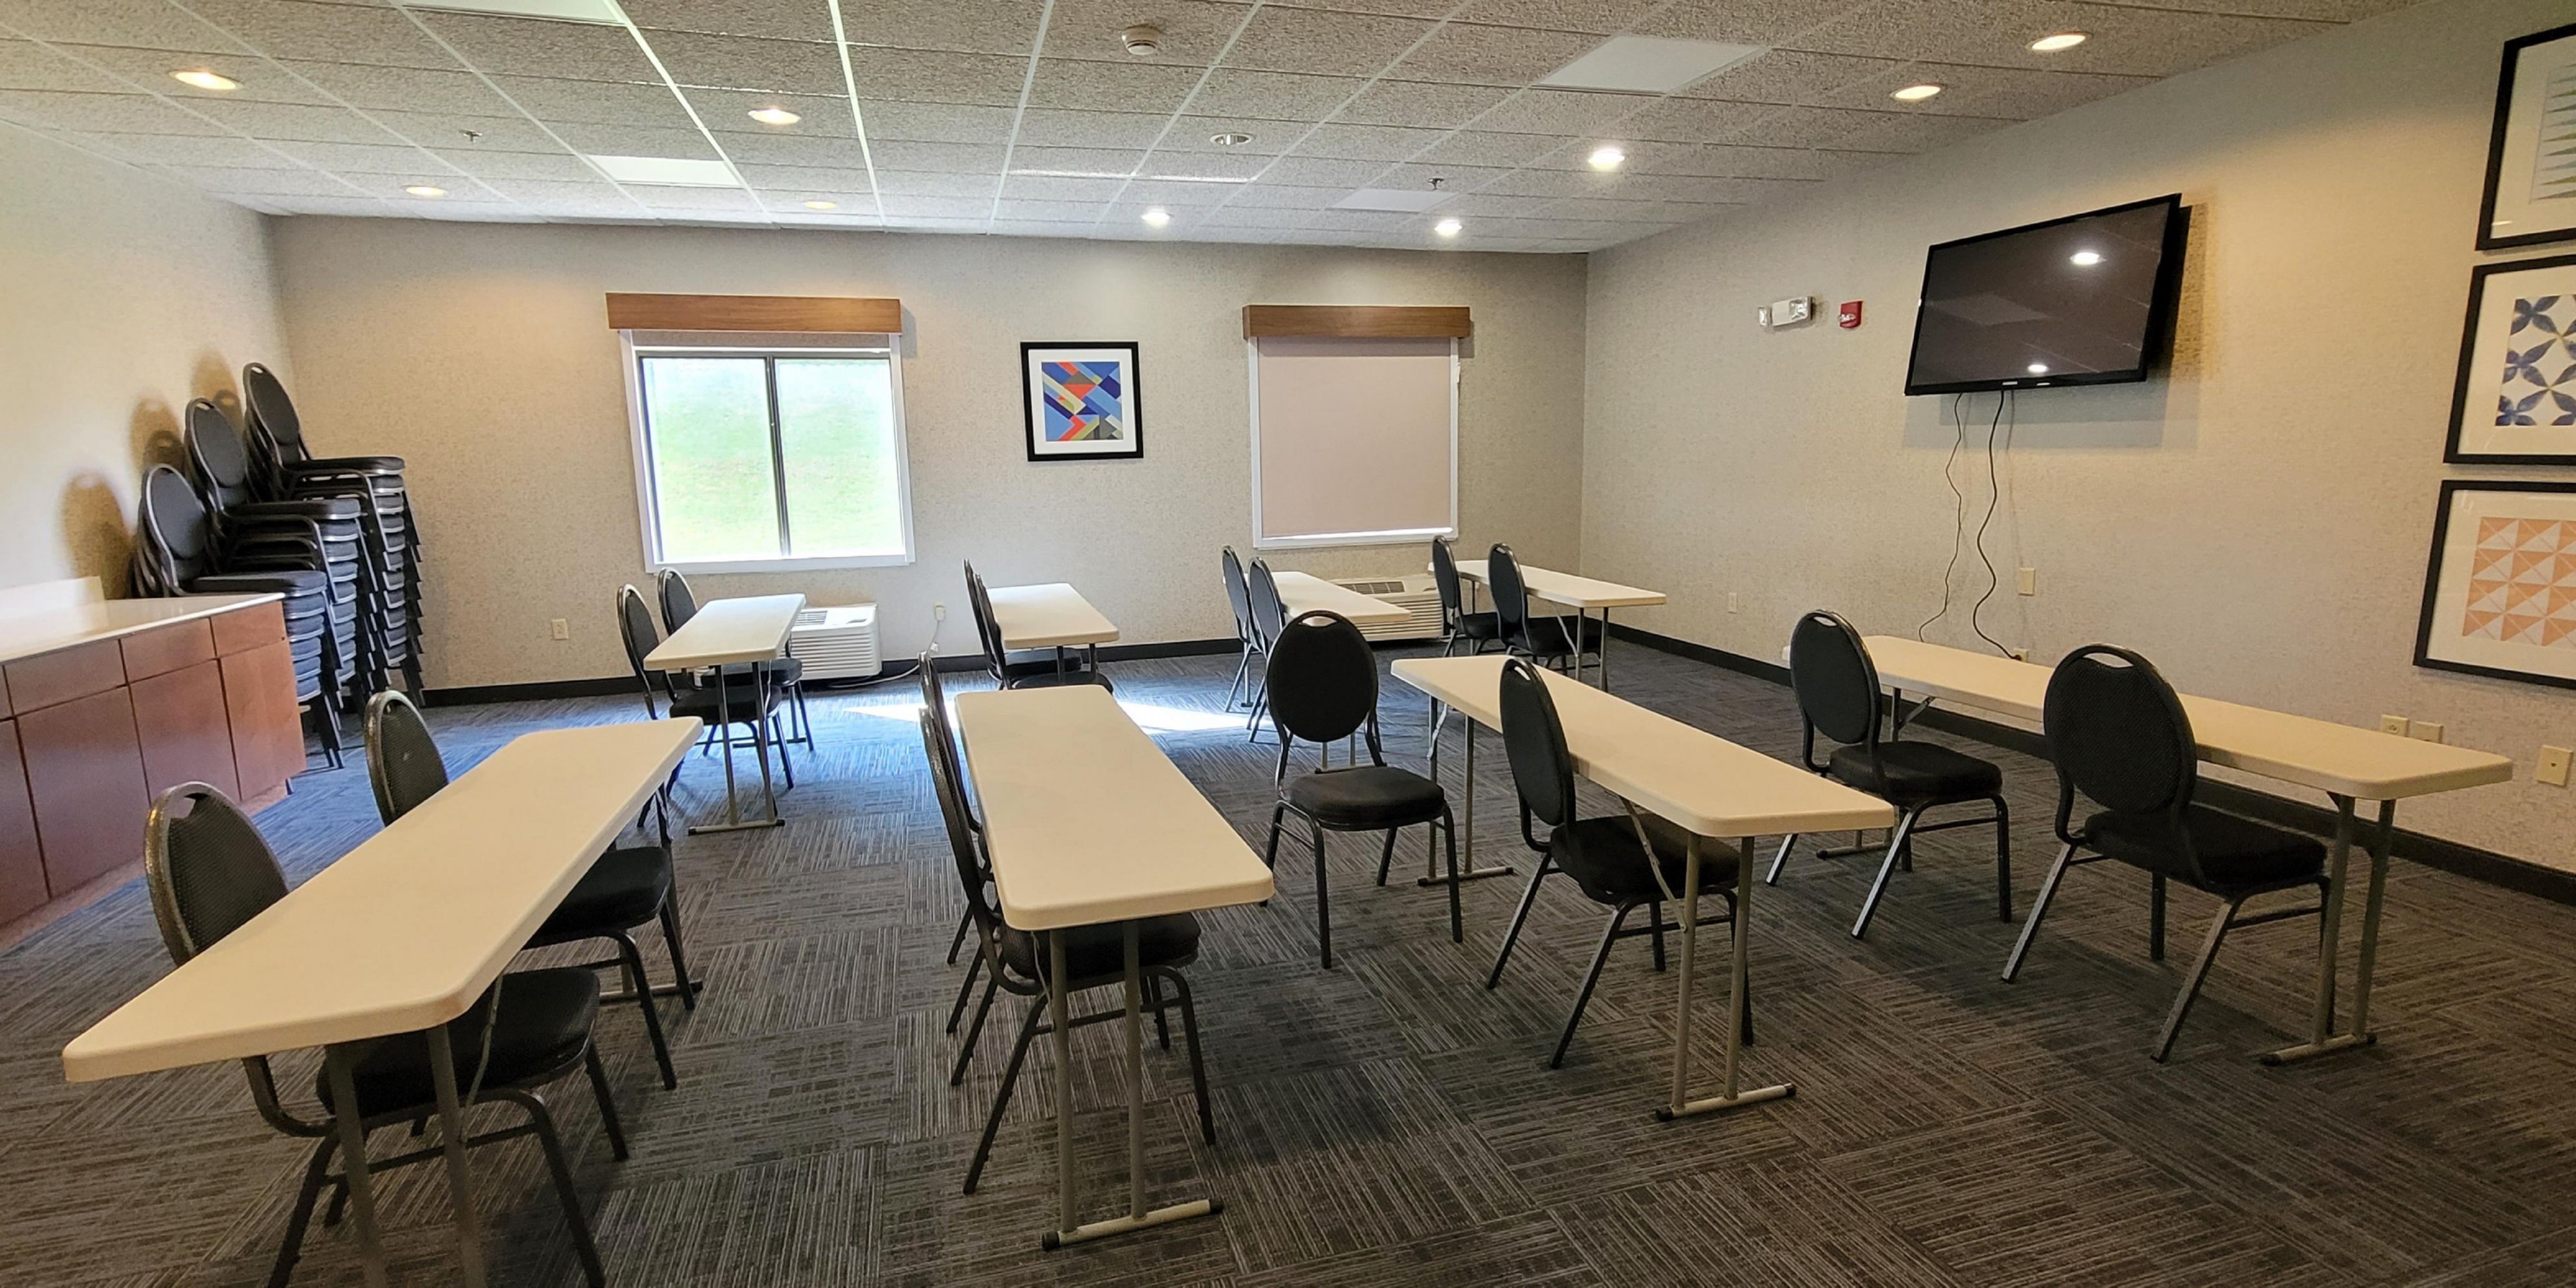 We offer a meeting space that can be used for any special event. We have the space for baby showers, wedding showers, family reunions, birthday parties, graduations, Etc.! Schedule a time to check it out today!